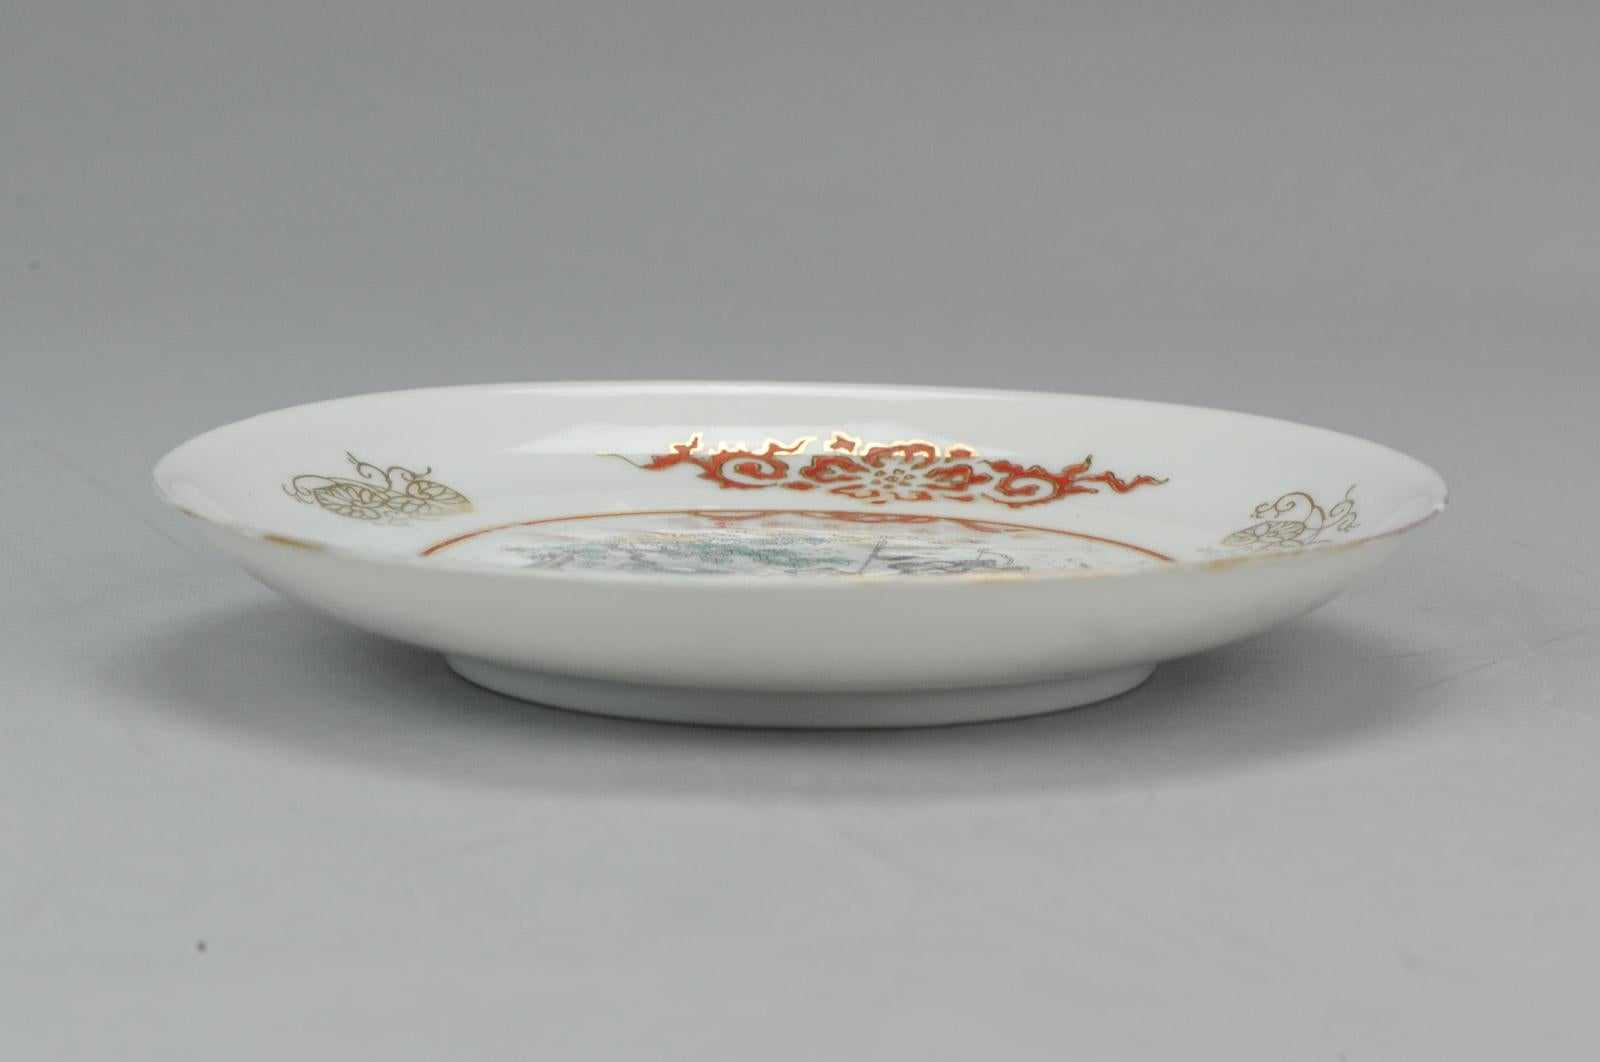 Antique Japanese Porcelain Plate Calligraphy Warriors Marked Base, 19th Century

Additional information:
Material: Porcelain & Pottery
Type: Plates
Region of Origin: Japan
Period: 19th century, 20th century Meiji Periode (1867-1912)
Age: 19th